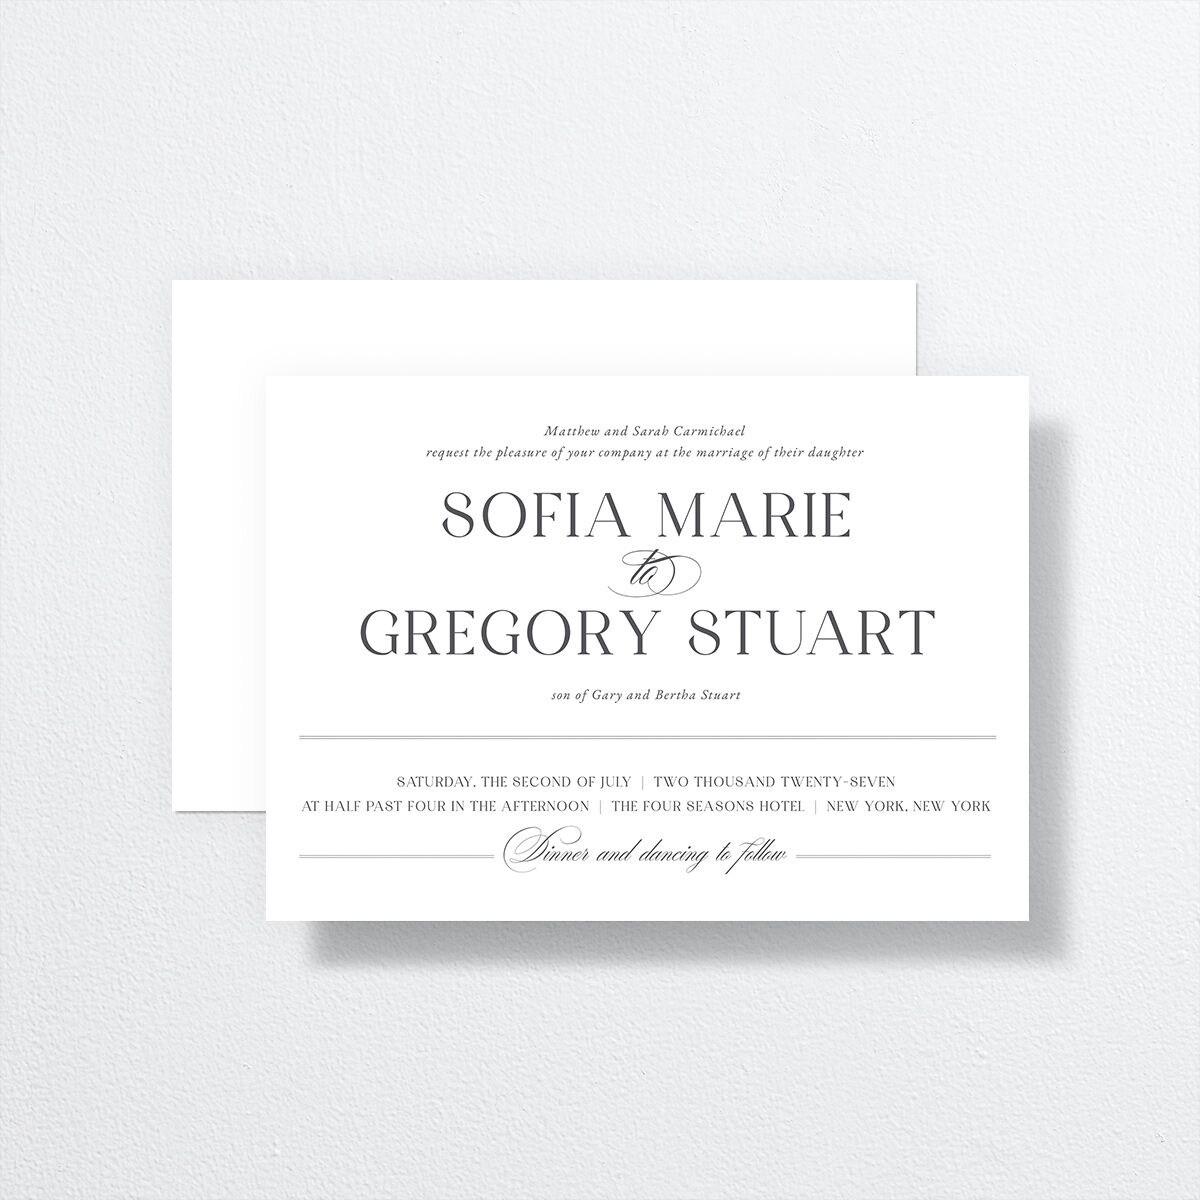 Classically Elegant Wedding Invitation front-and-back in White